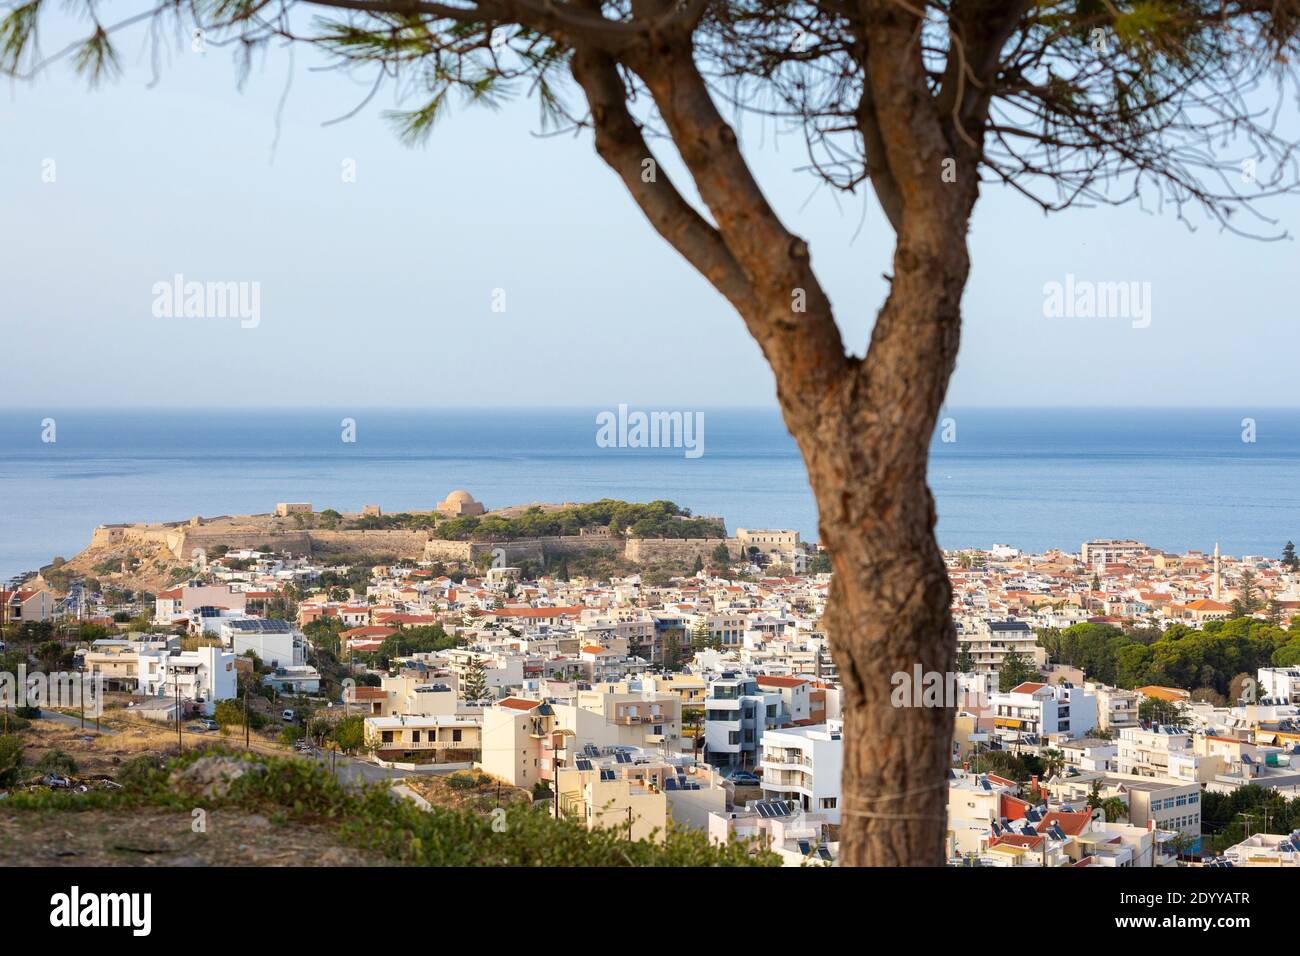 Cityscape view of Rethymno looking towards the old town, Fortezza Castle, and the sea, Crete, Greece Stock Photo